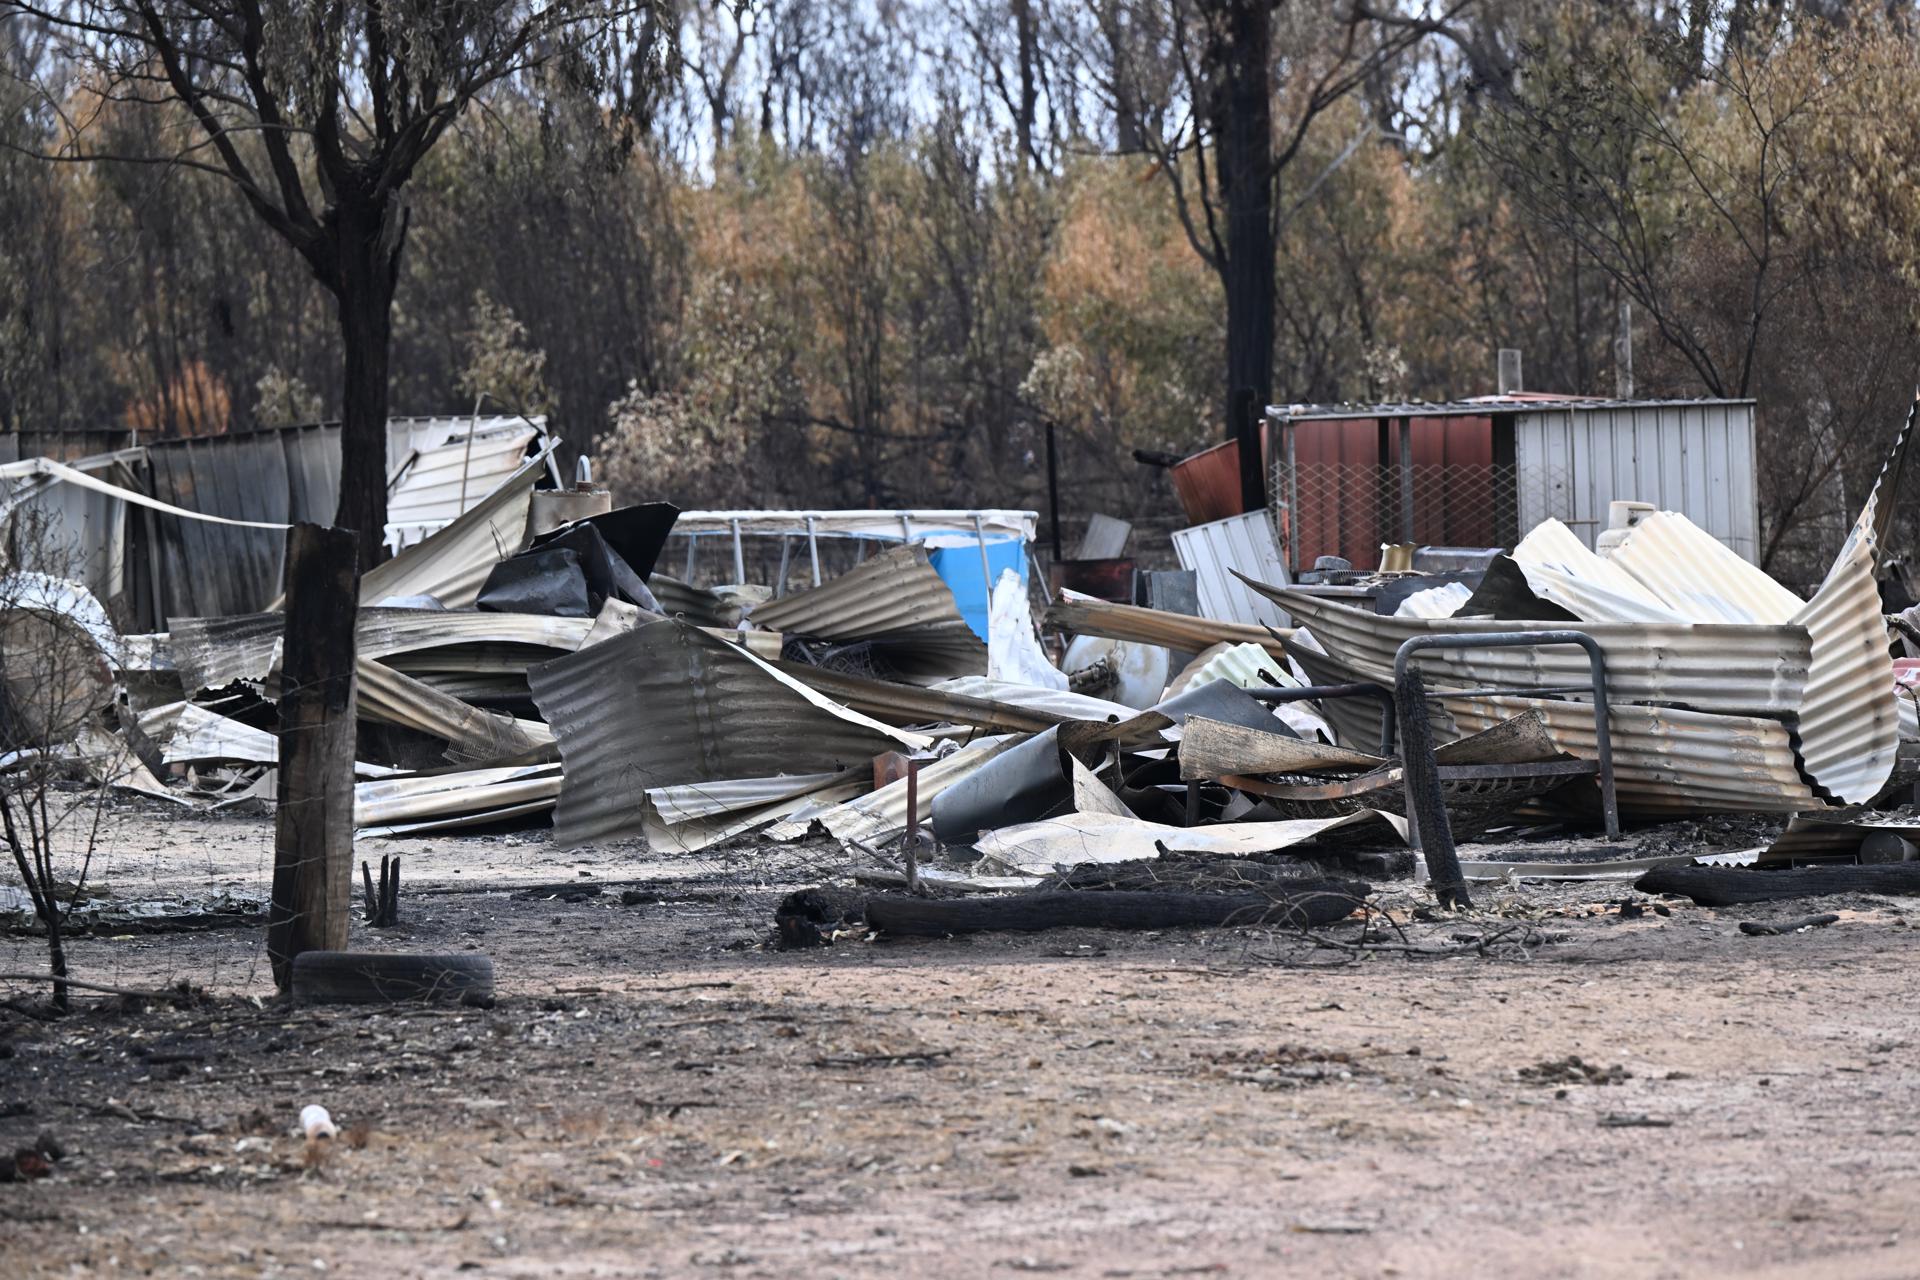 A view of damage at a property after being destroyed by bushfires near the town of Tara, Queensland, Australia, 31 October 2023. EFE-EPA/DARREN ENGLAND AUSTRALIA AND NEW ZEALAND OUT
